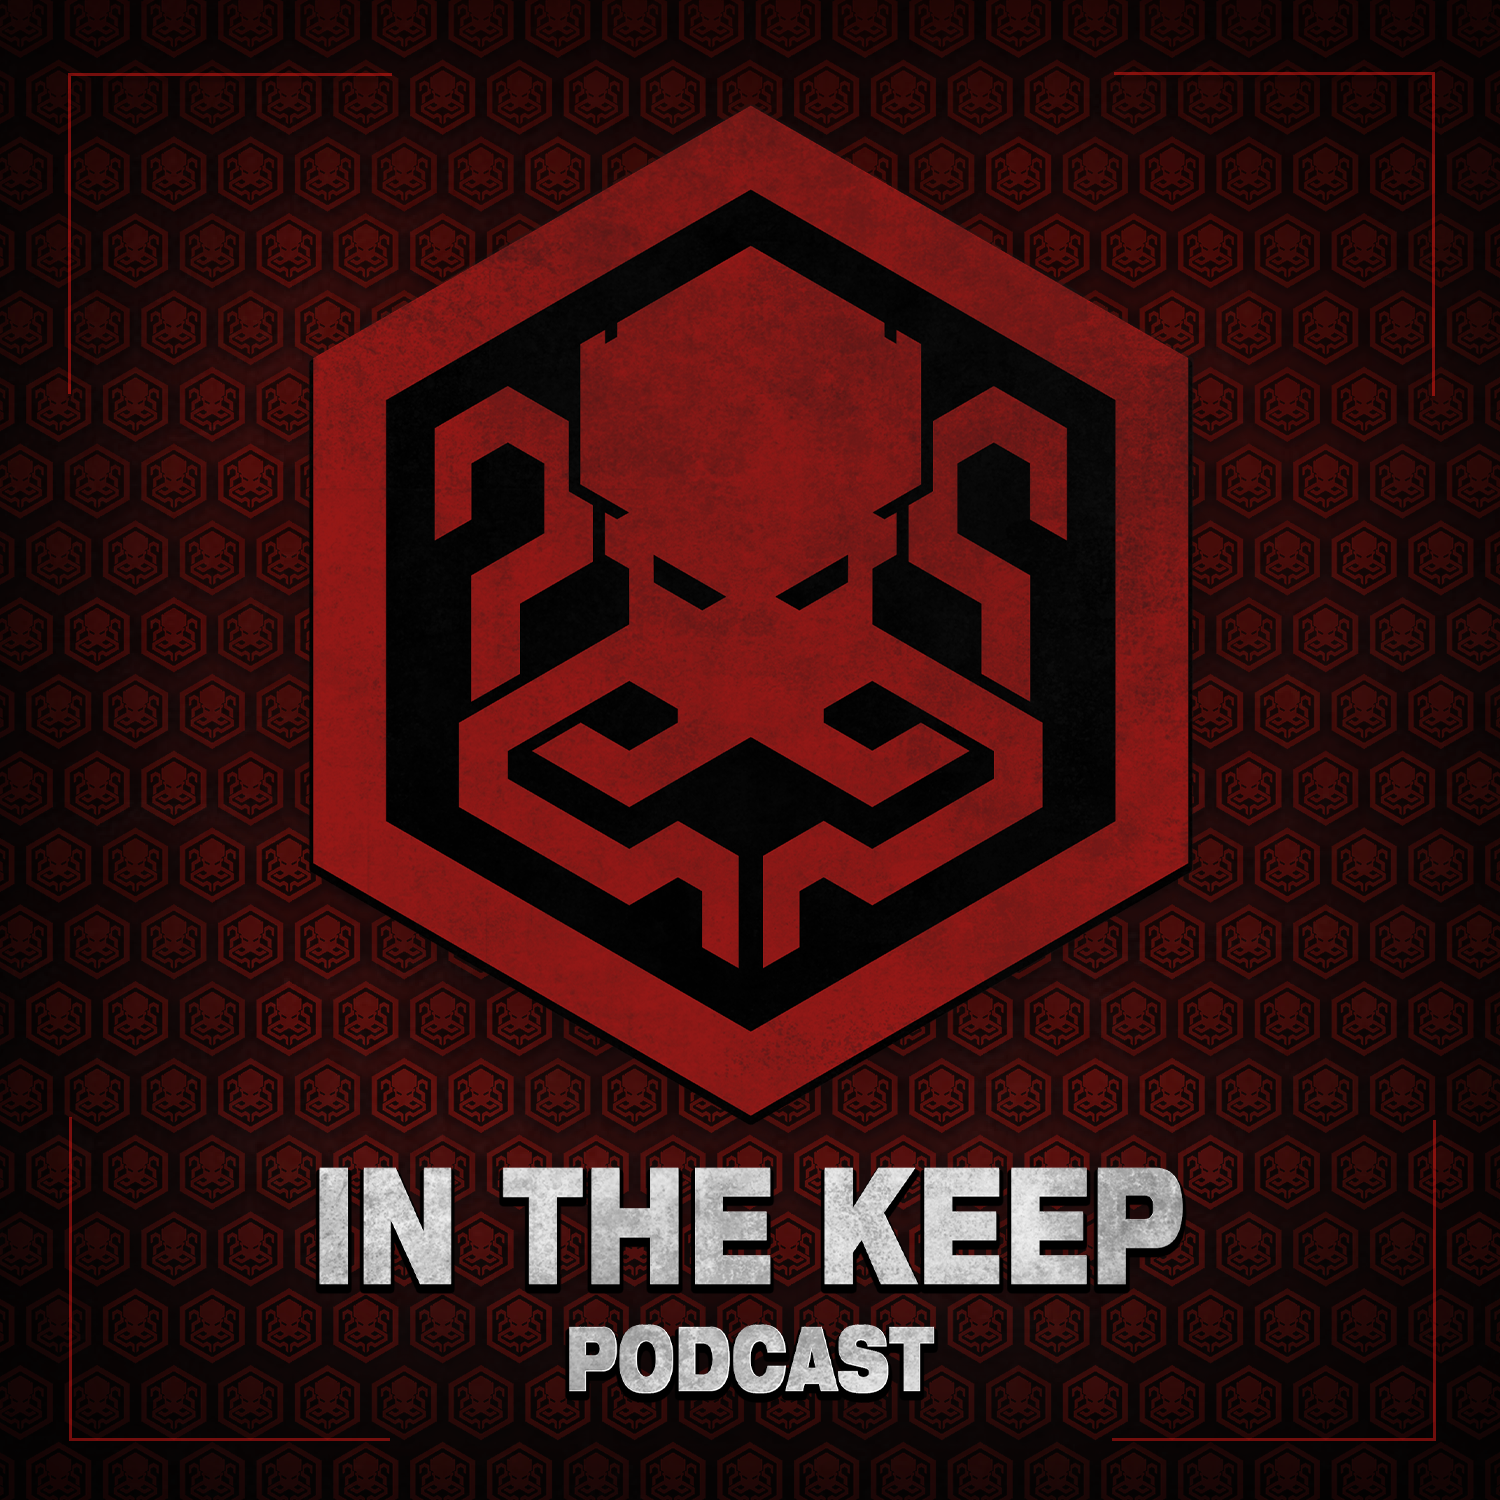 In The Keep Podcast – #85 Zach Murphy (E1M1 Magazine)